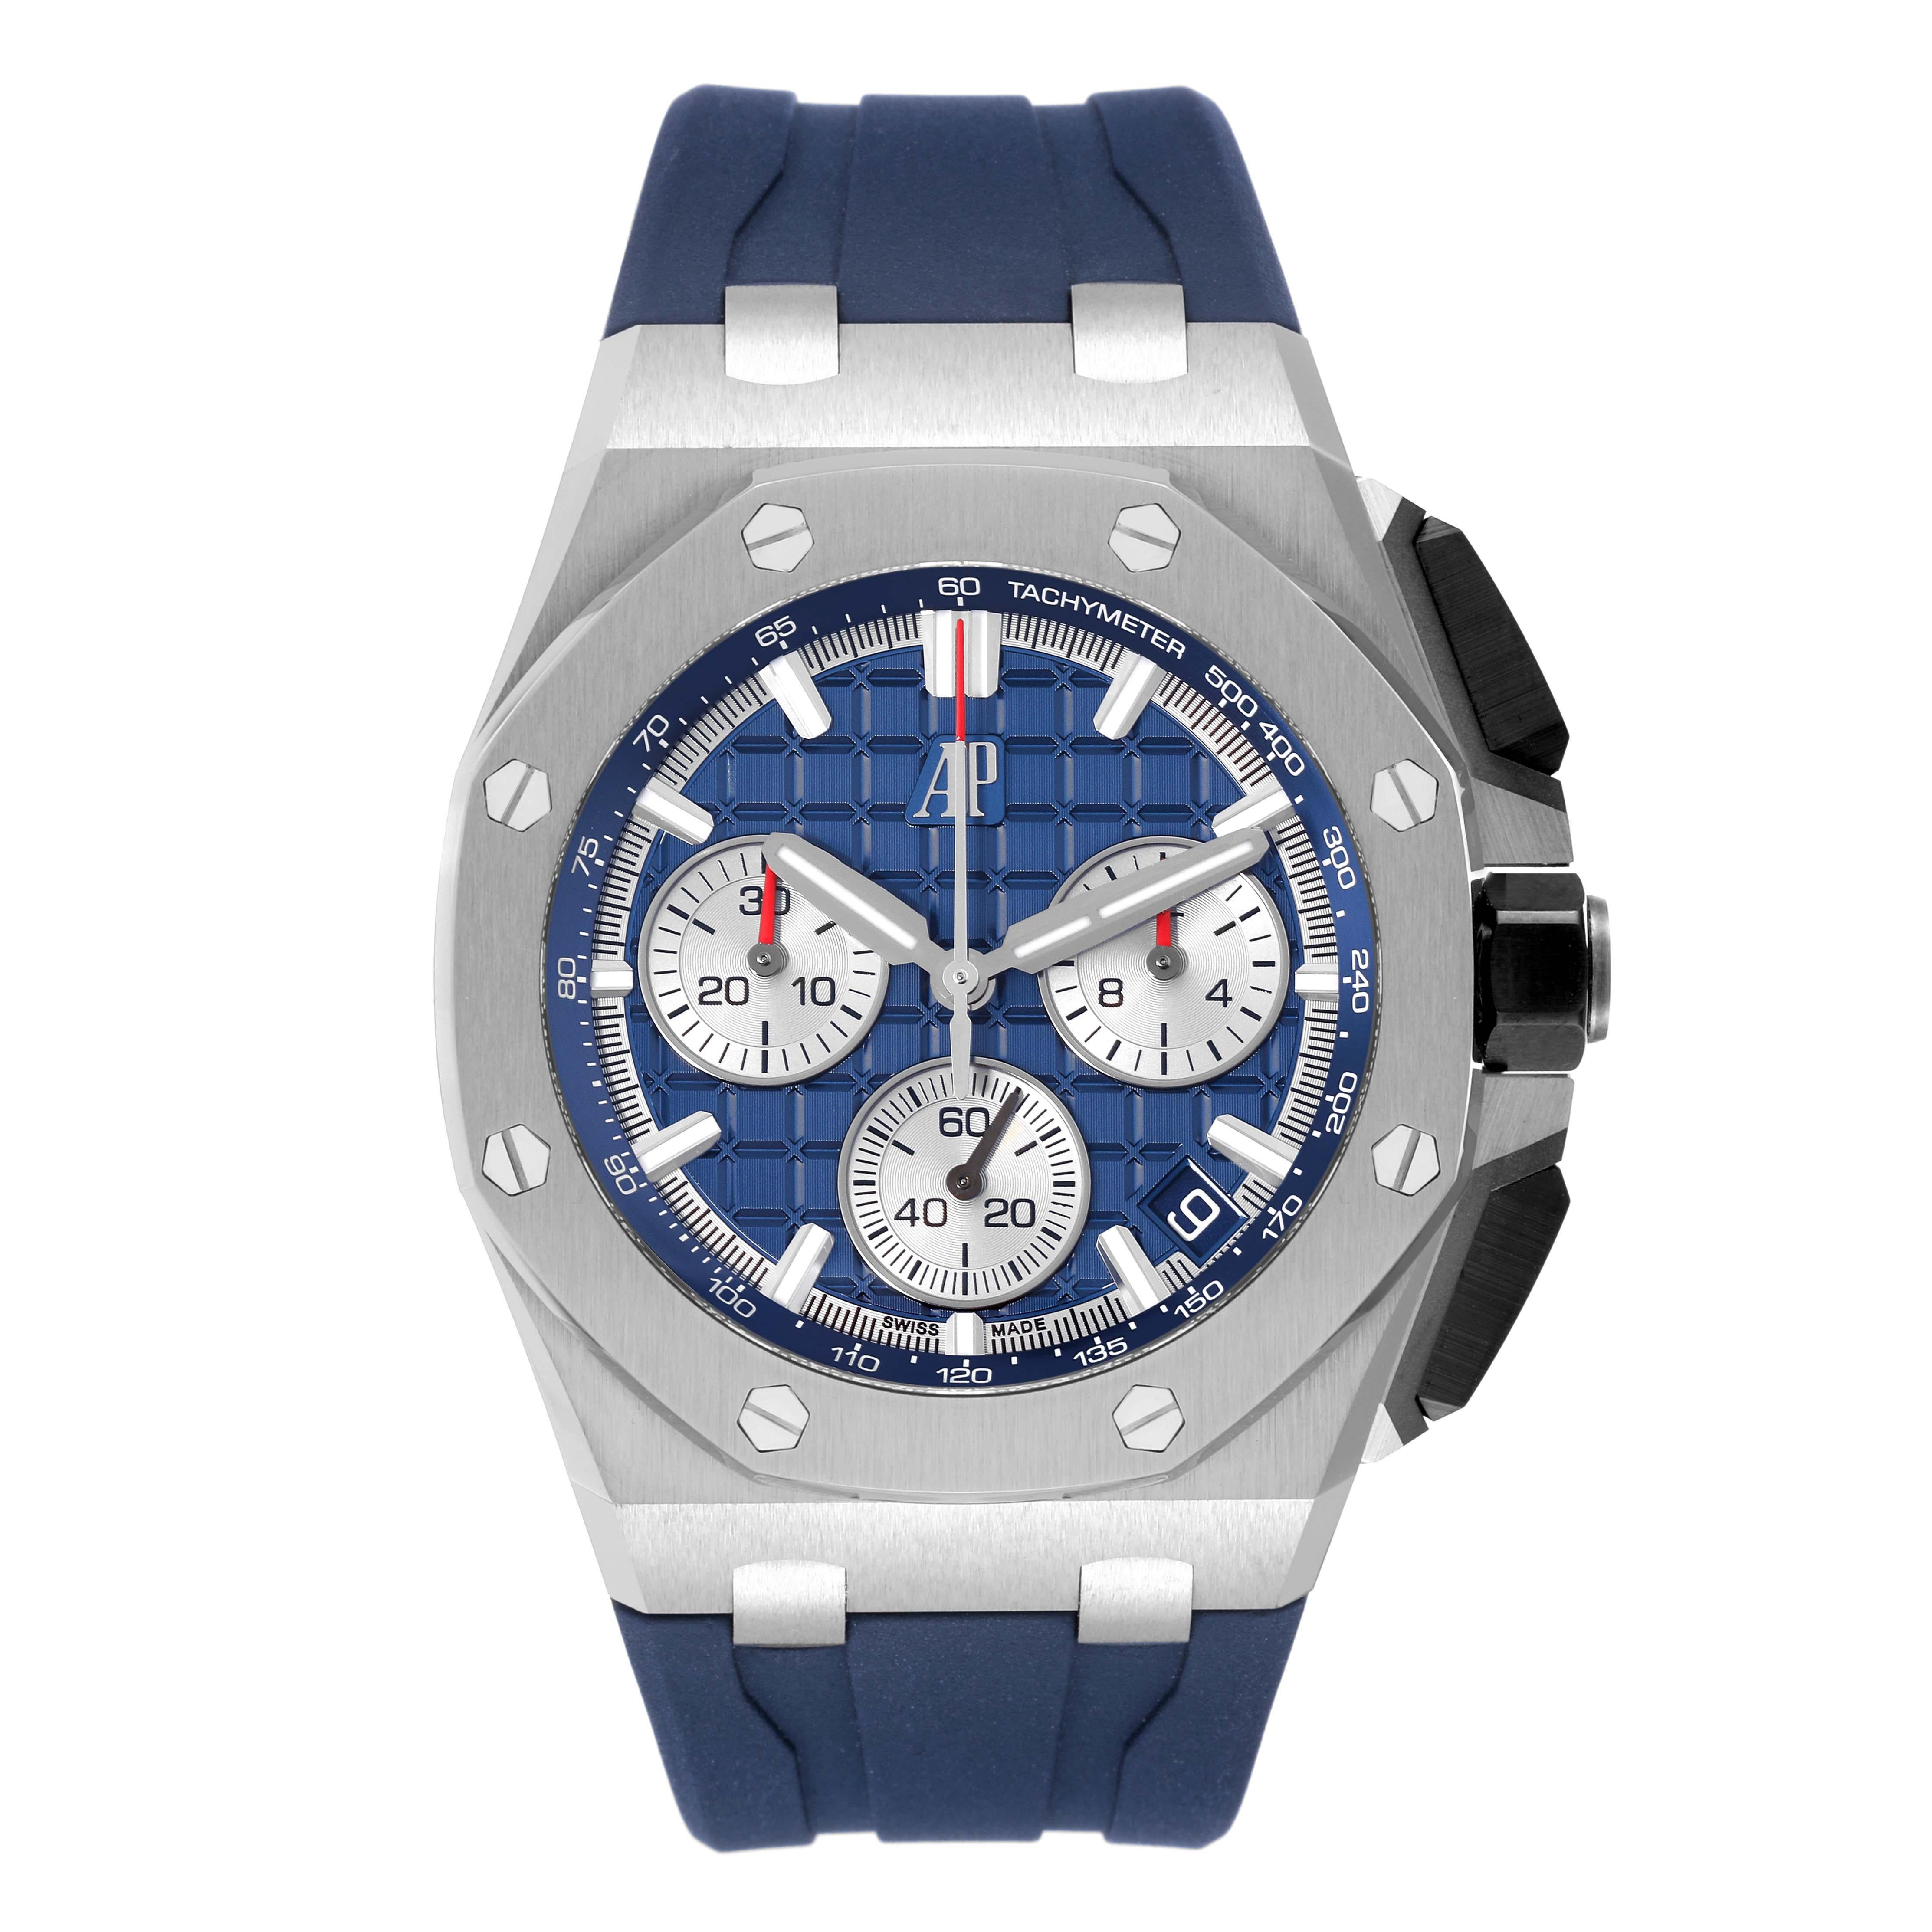 Audemars Piguet Royal Oak Offshore Titanium Blue Dial Mens Watch 26420 Unworn. Automatic self-winding chronograph movement with flyback function. Titanium octagonal case 43 mm in diameter. Case thickness: 15.5 mm. Exhibition sapphire crystal case